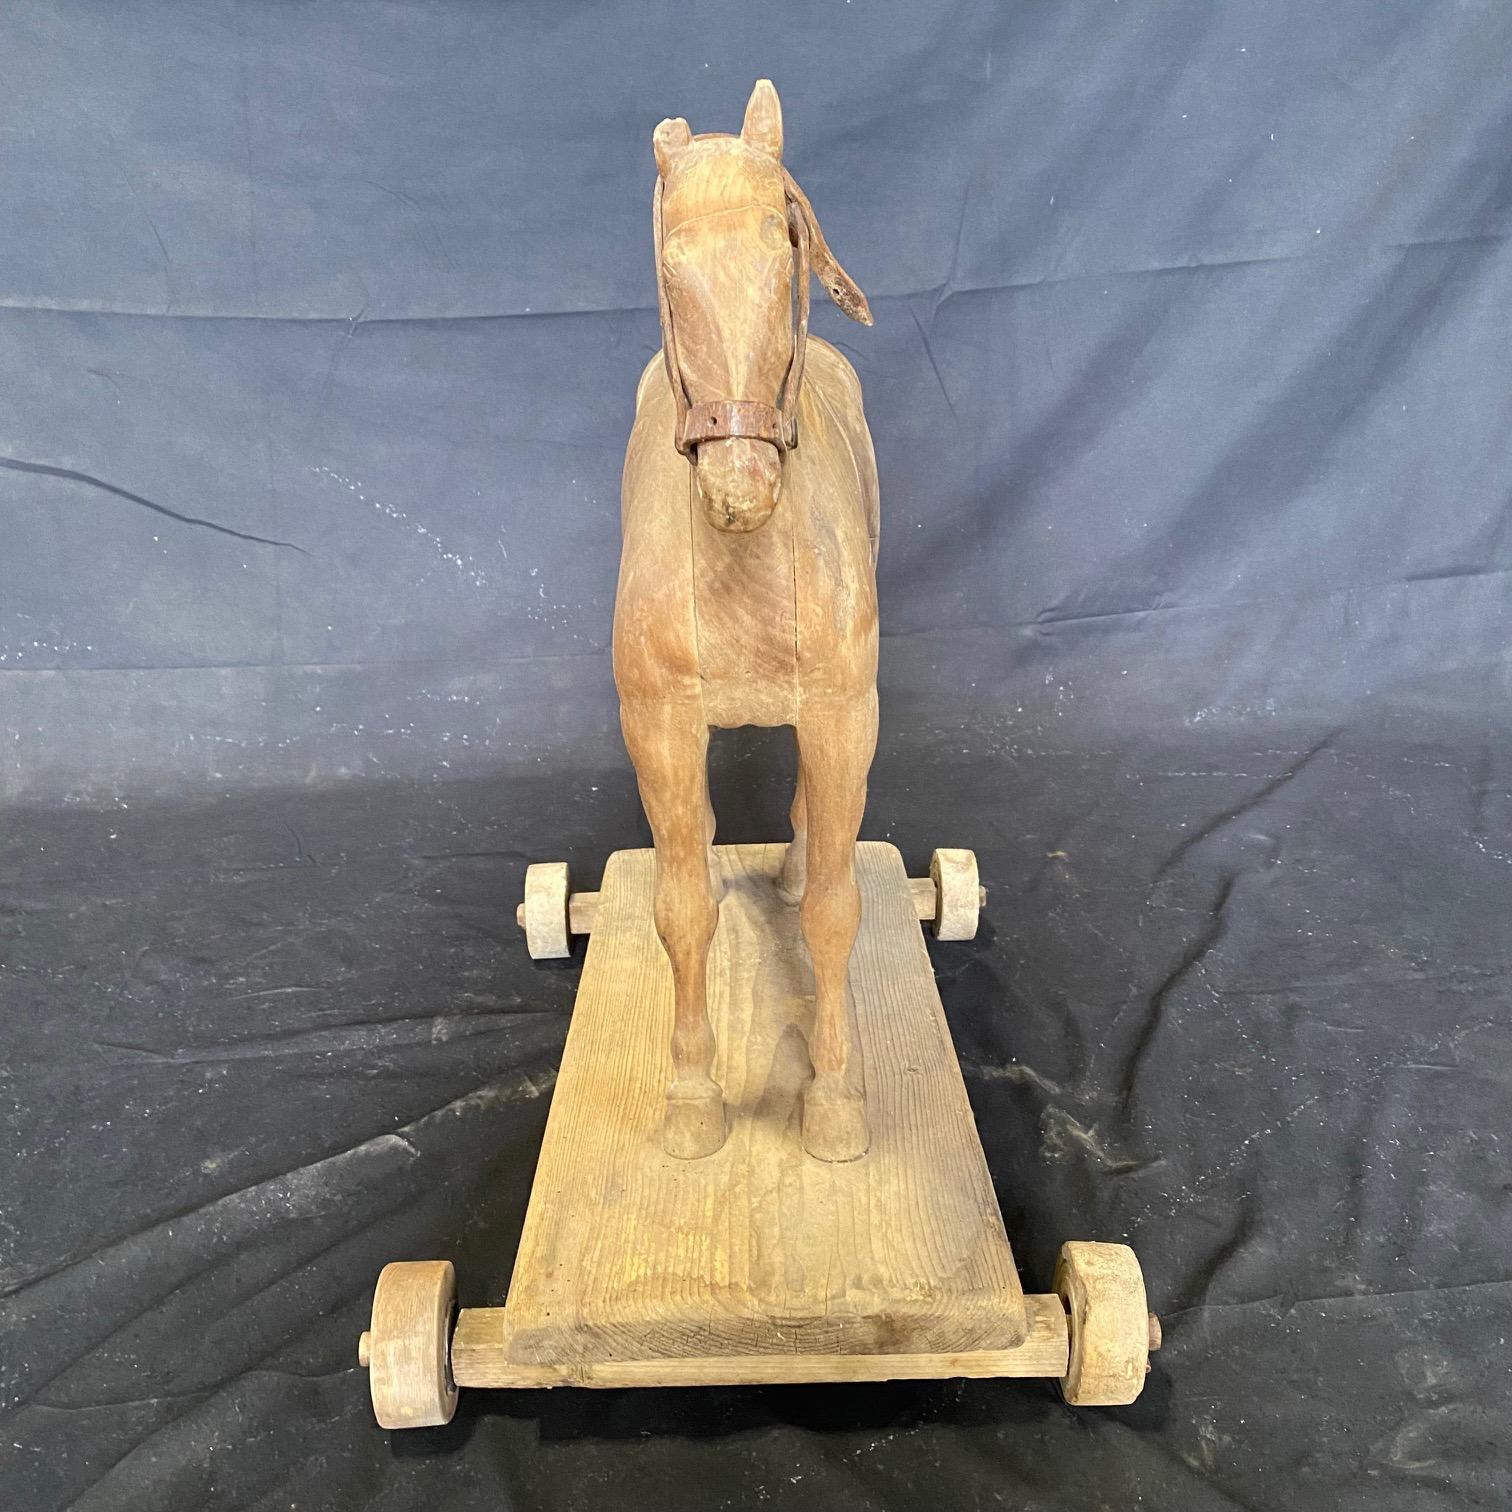 Late 19th century oversized pull along horse toy. A stunning handmade example with unusually large propositions. Stands on original wooden pull along base with functioning wooden wheels. A sculptural work of art bought in the South of France.